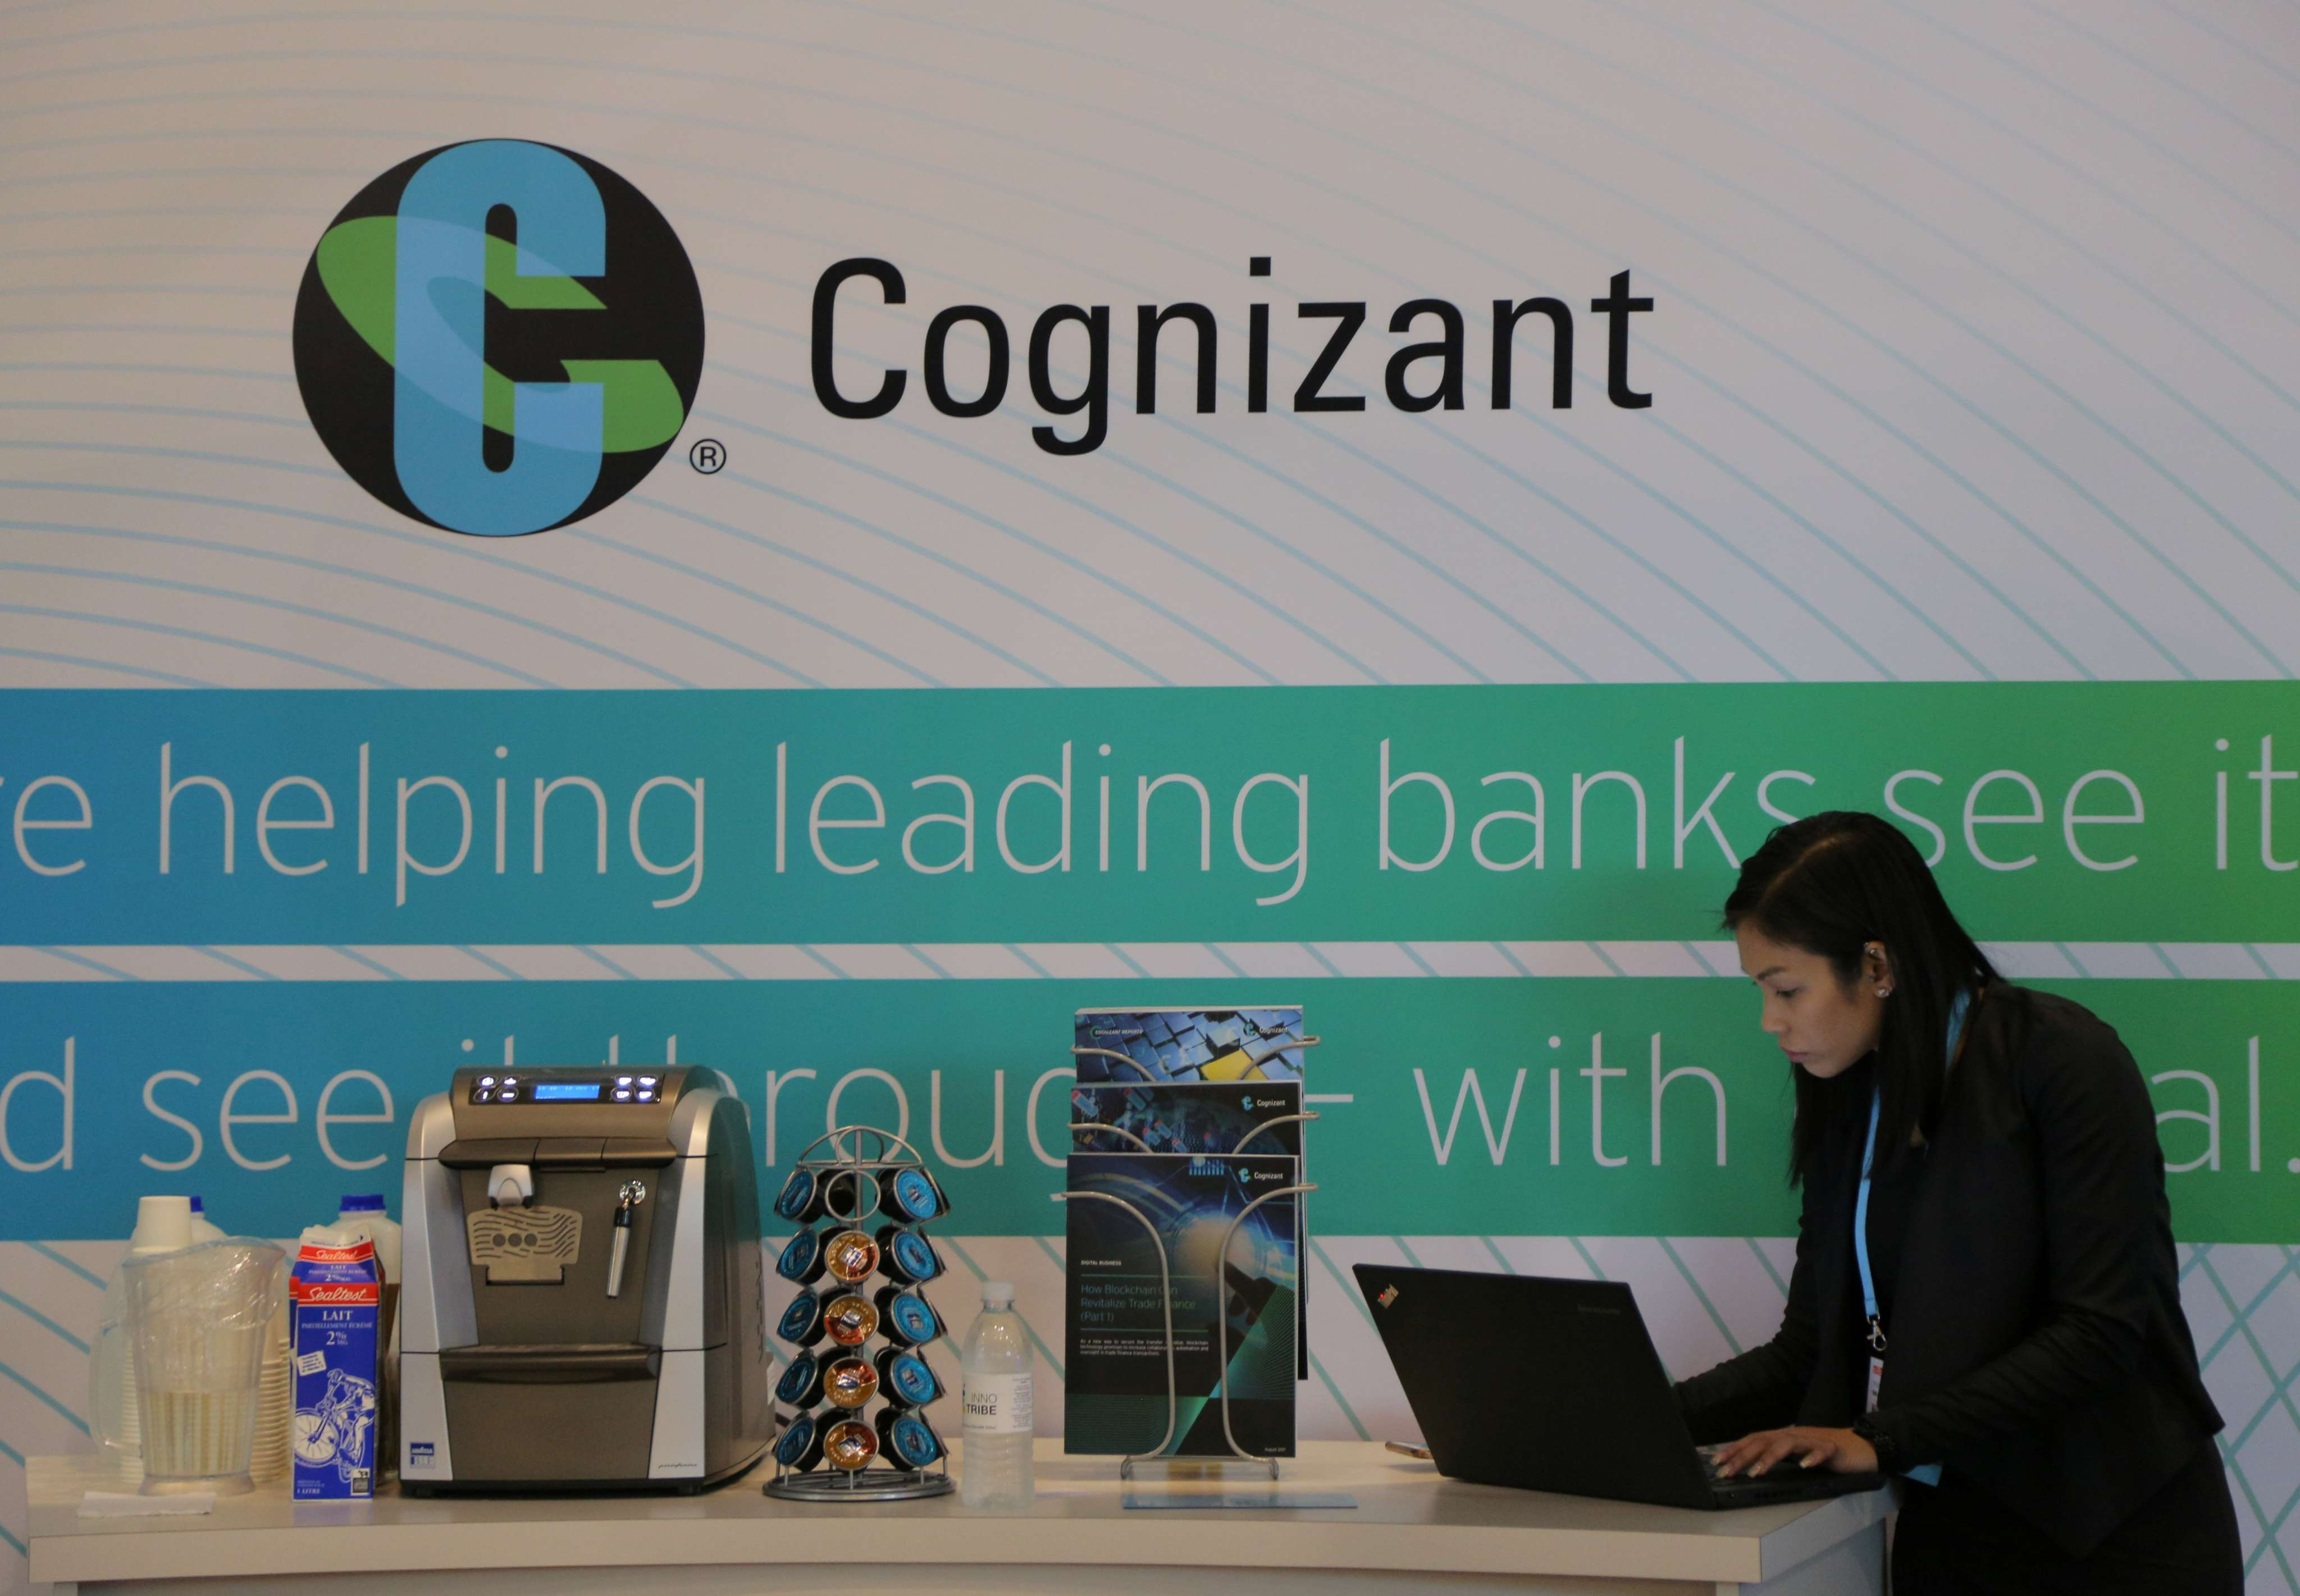 20-facts-about-cognizant